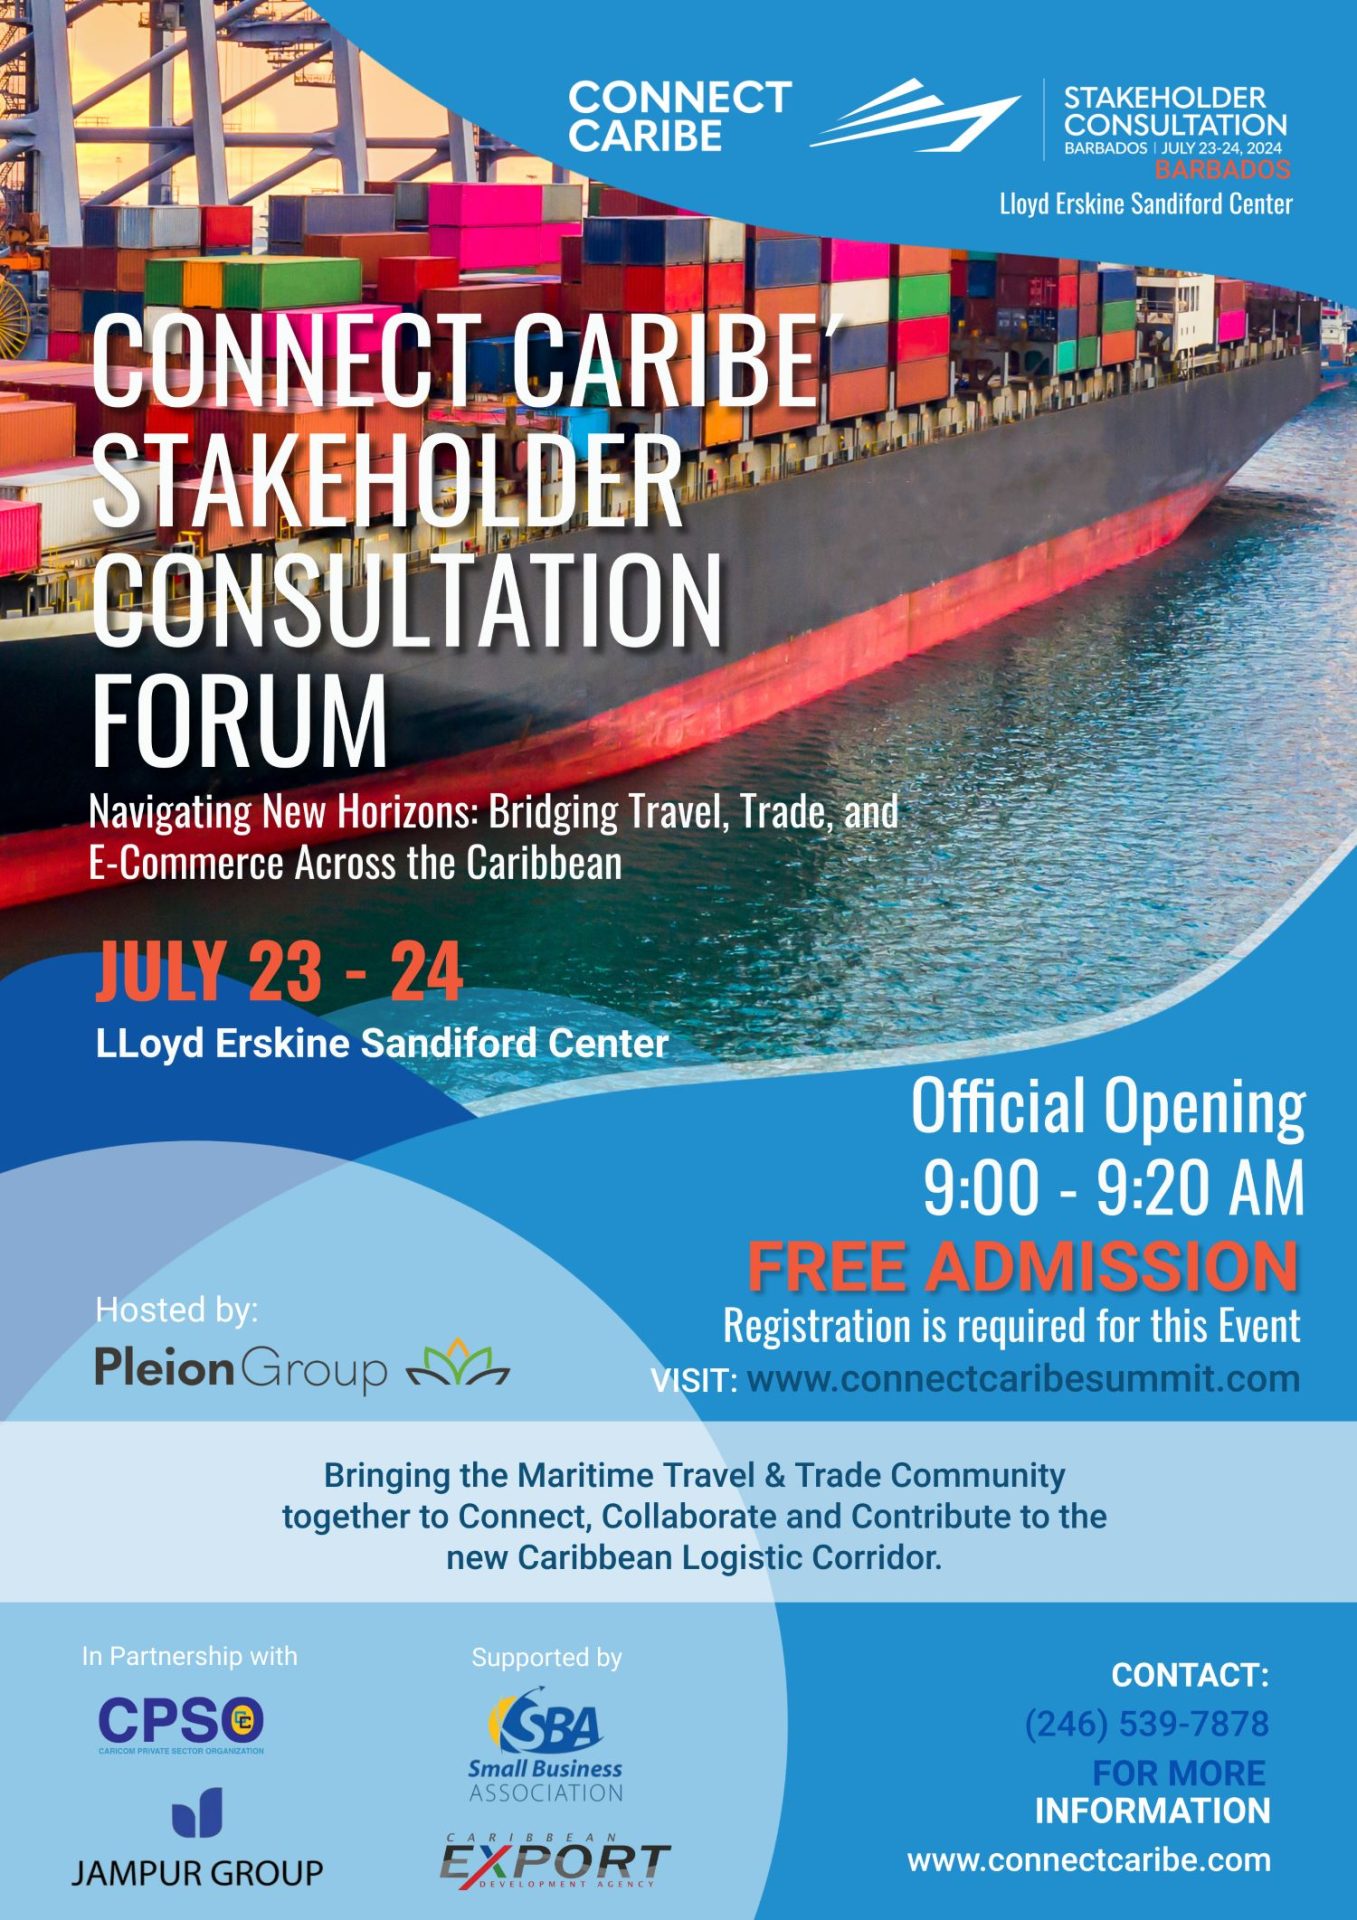 CONNECT CARIBE STAKEHOLDER CONSULTATION FORUM